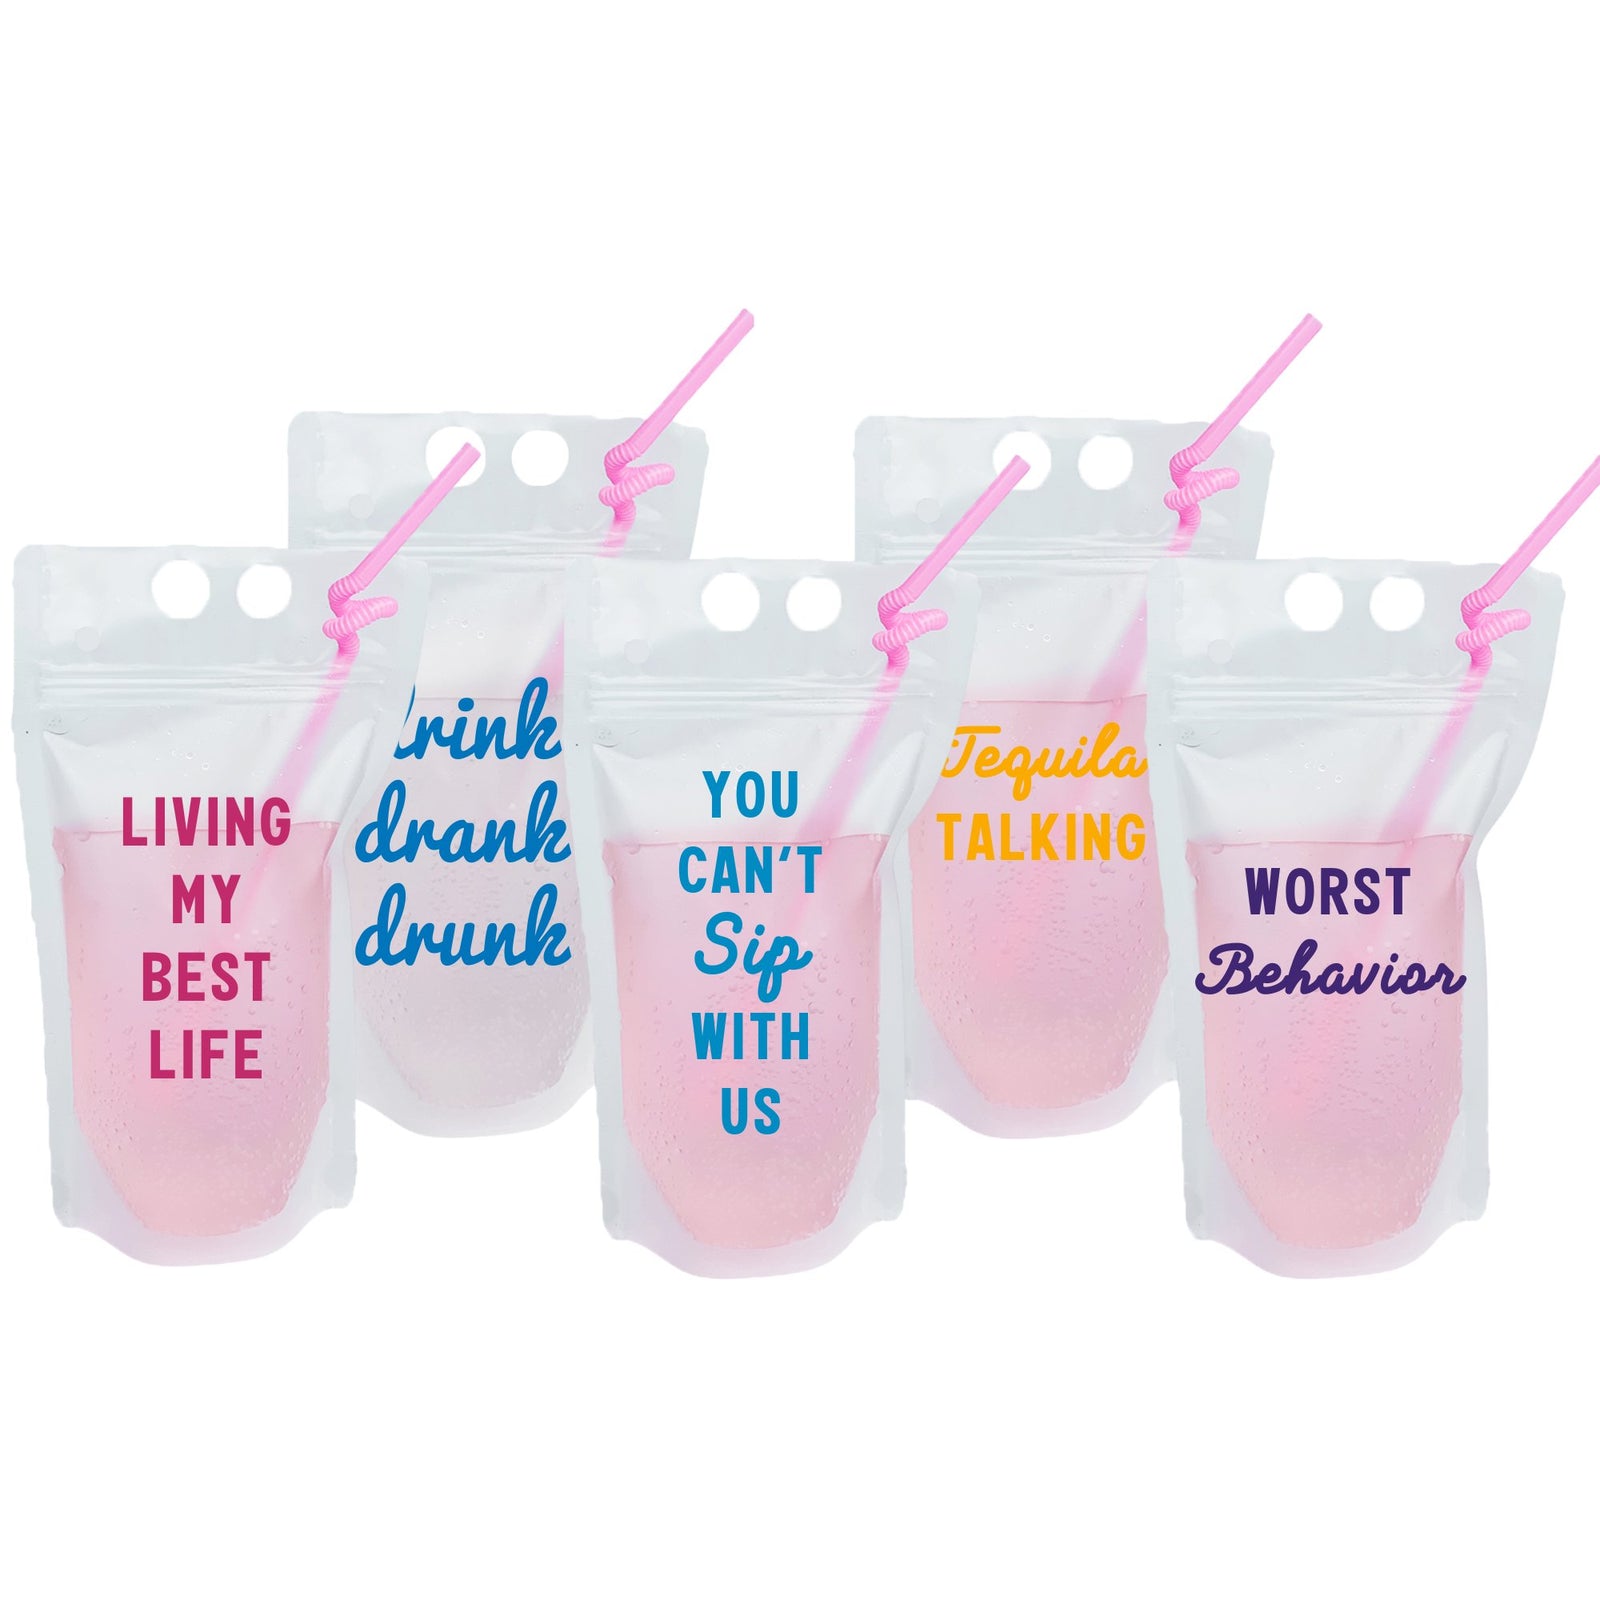 Drink Pouches Juice Pouches Alcohol Drink Pouches Reusable Drink Pouch Pool  Party Cup Adult Juice Pouch Party Cups Beach Drink 